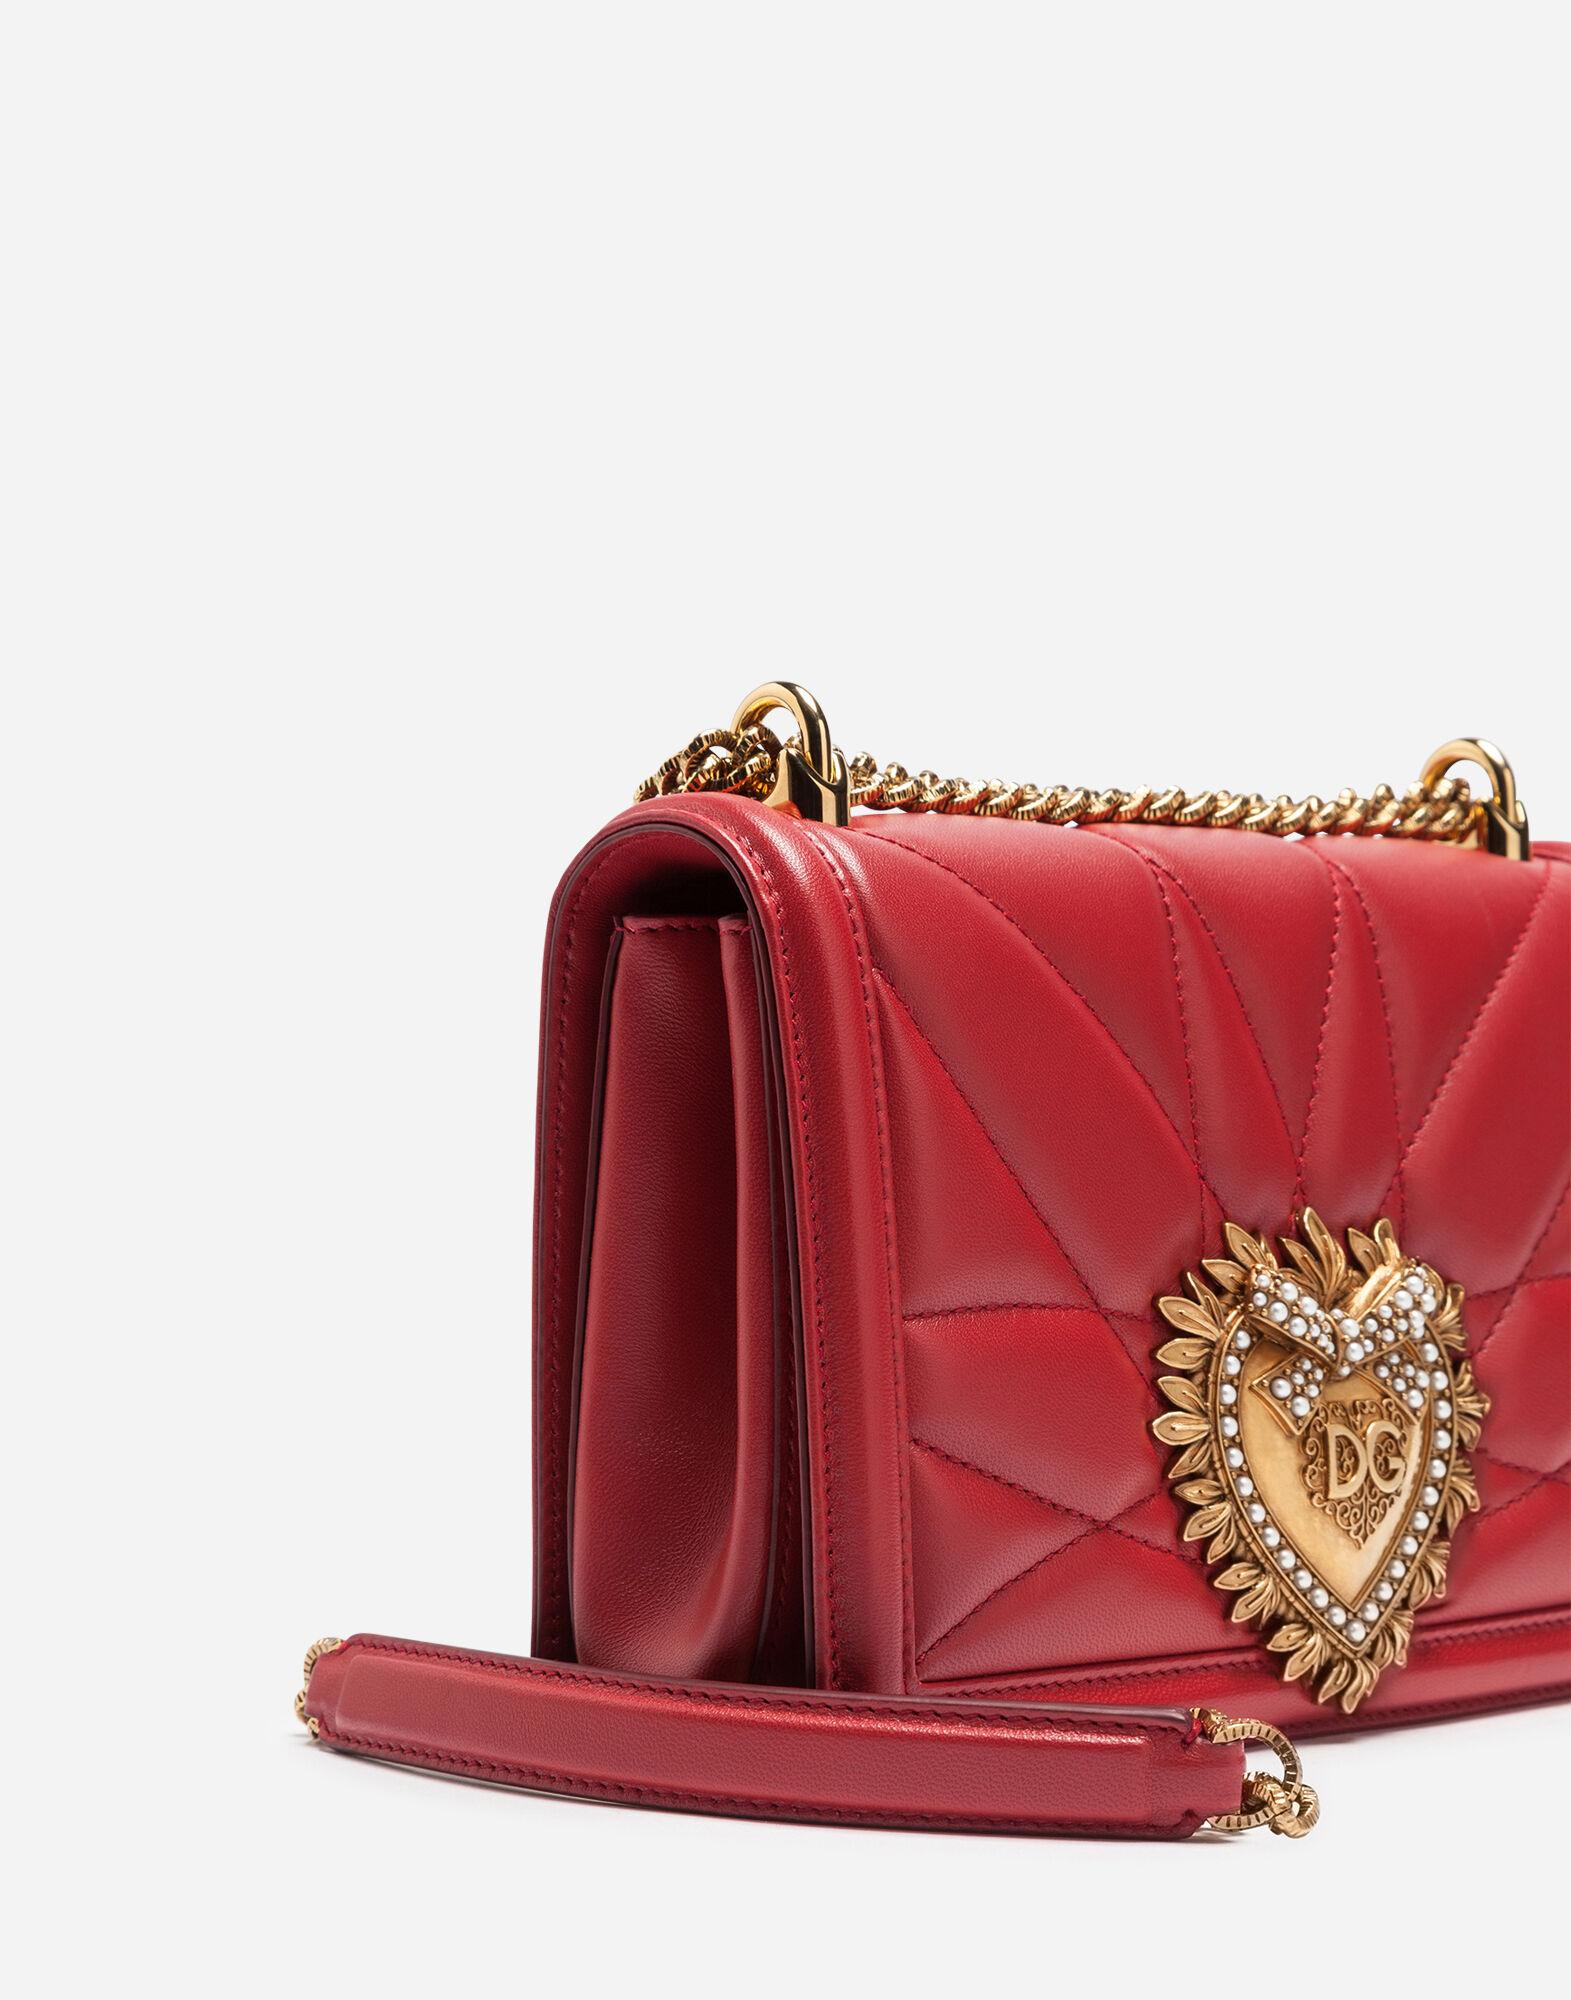 Dolce & Gabbana Devotion Quilted-leather Cross-body Bag in Poppy Red ...